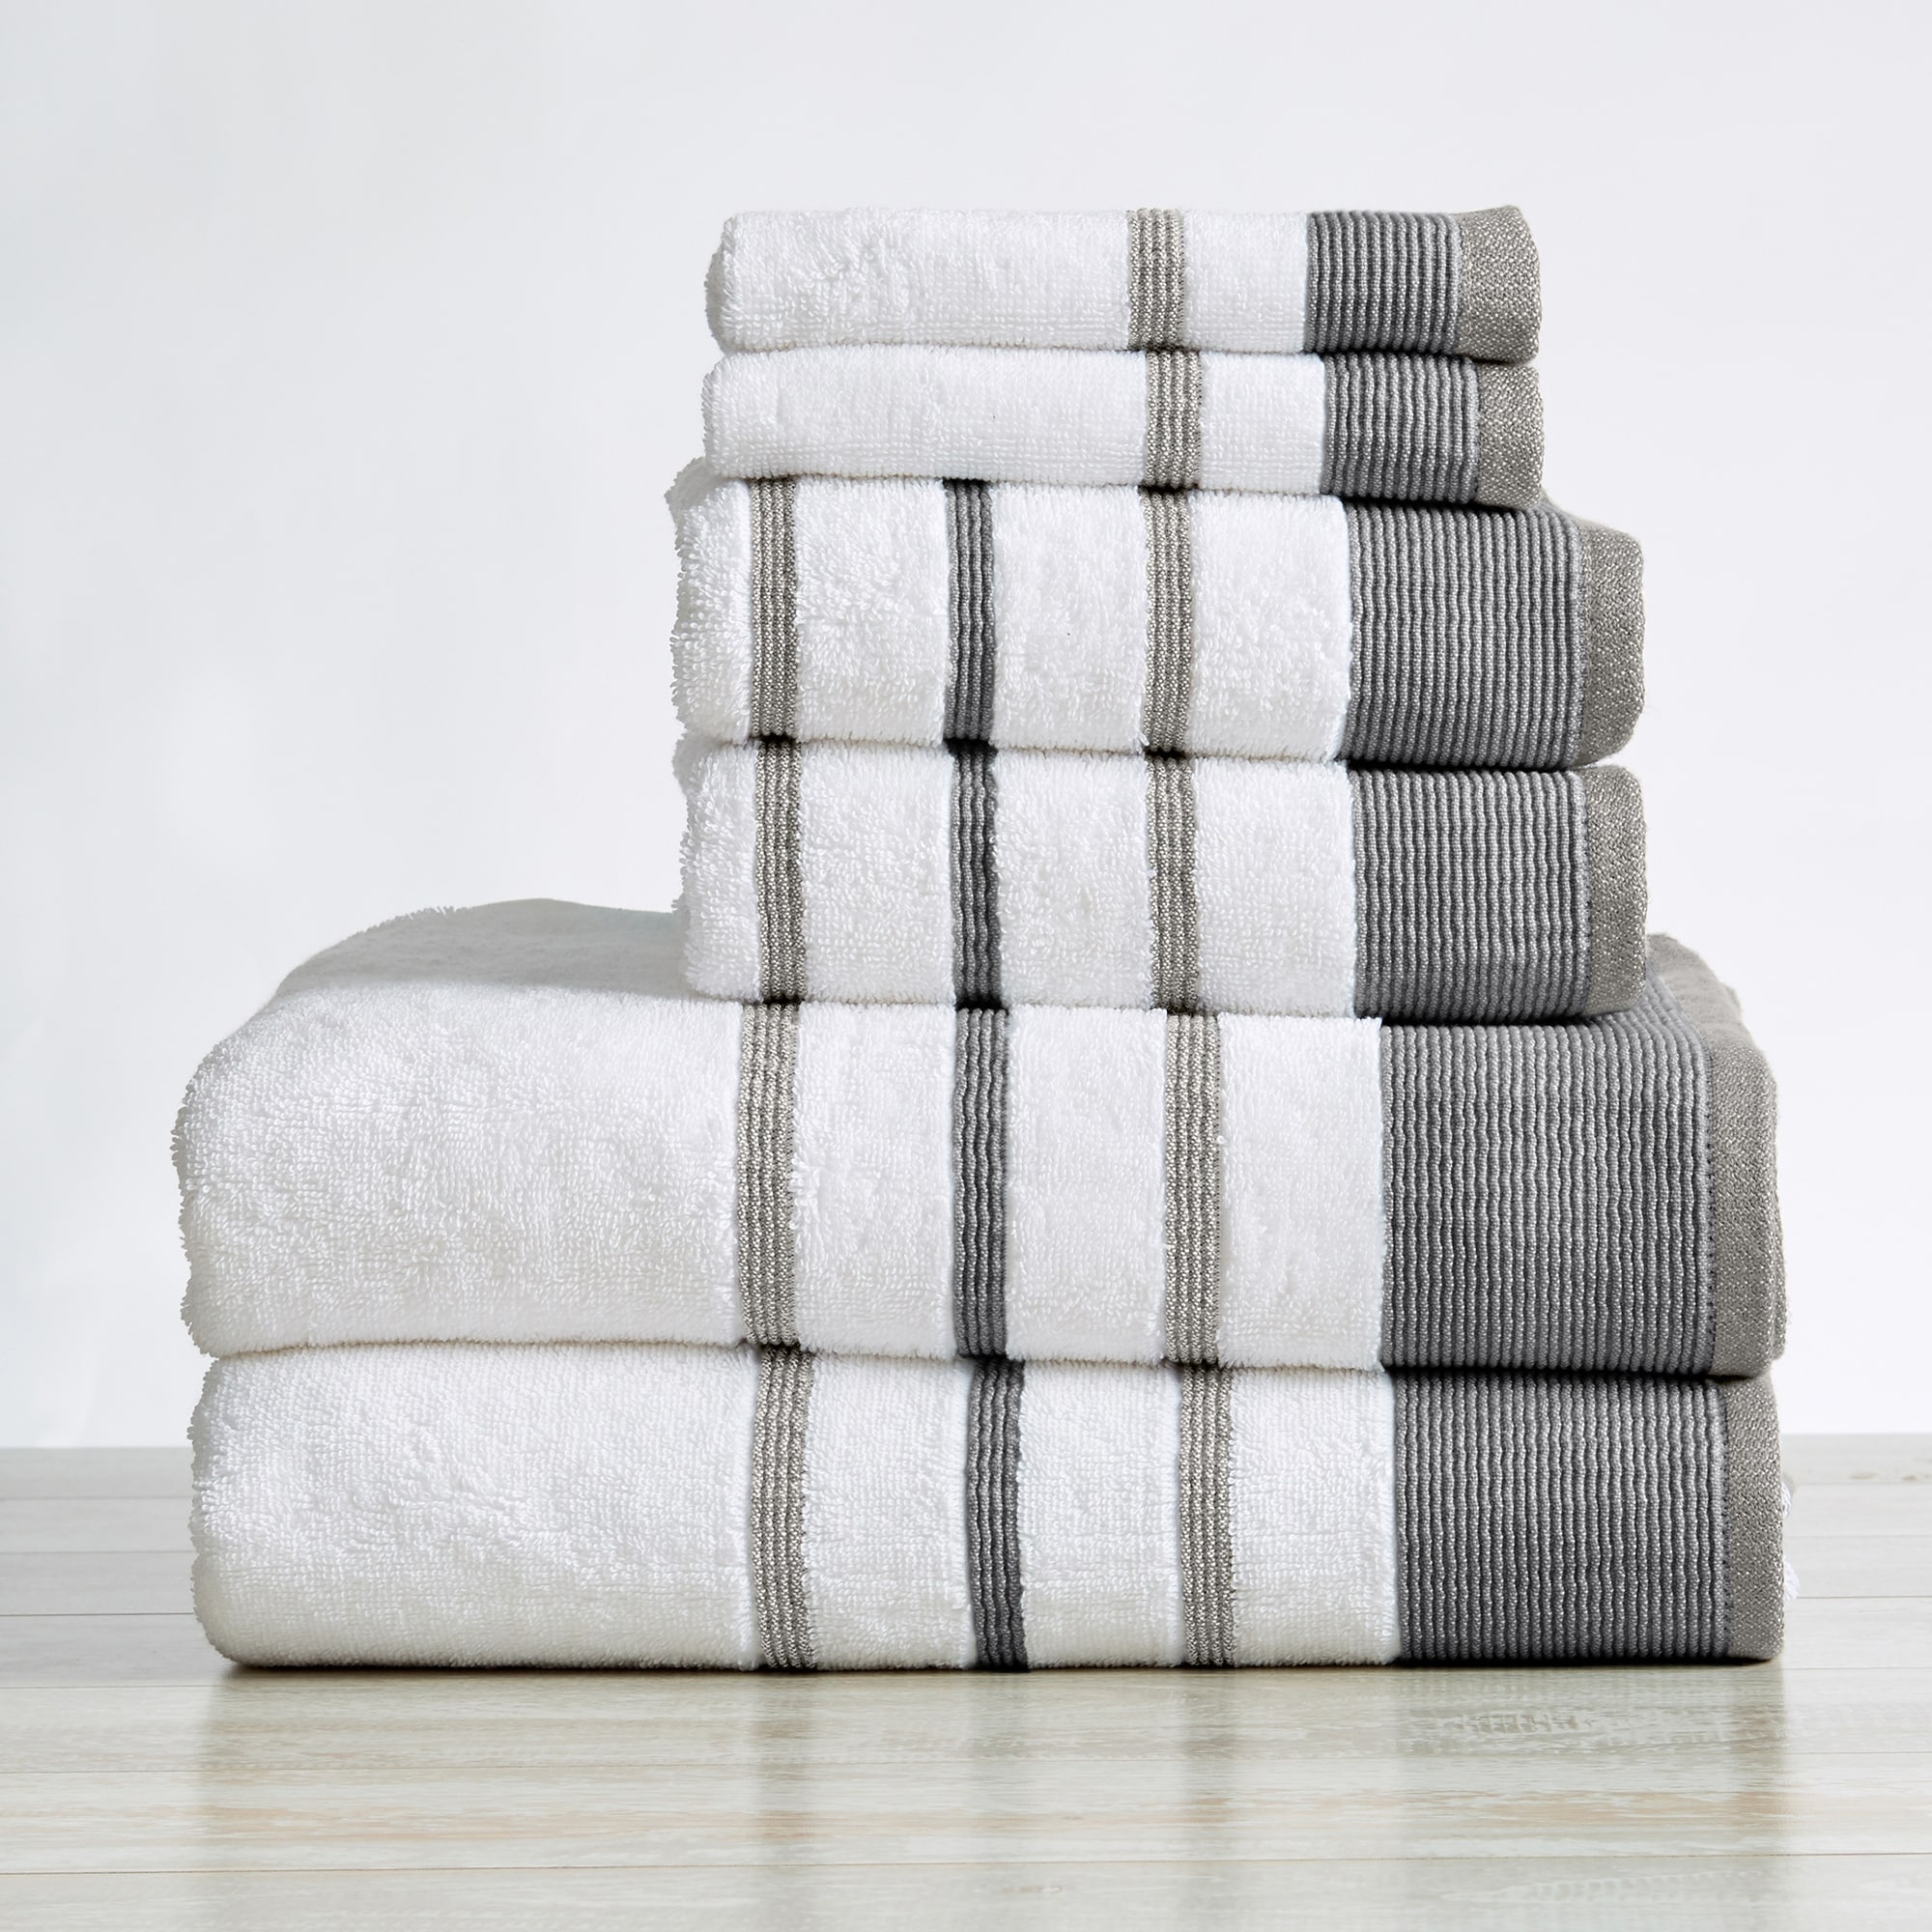 https://ak1.ostkcdn.com/images/products/is/images/direct/5927a8f22e242d42b311c9678fa6cb867fd426ce/Great-Bay-Home-Turkish-Cotton-Striped-Bath-Towel-Sets.jpg